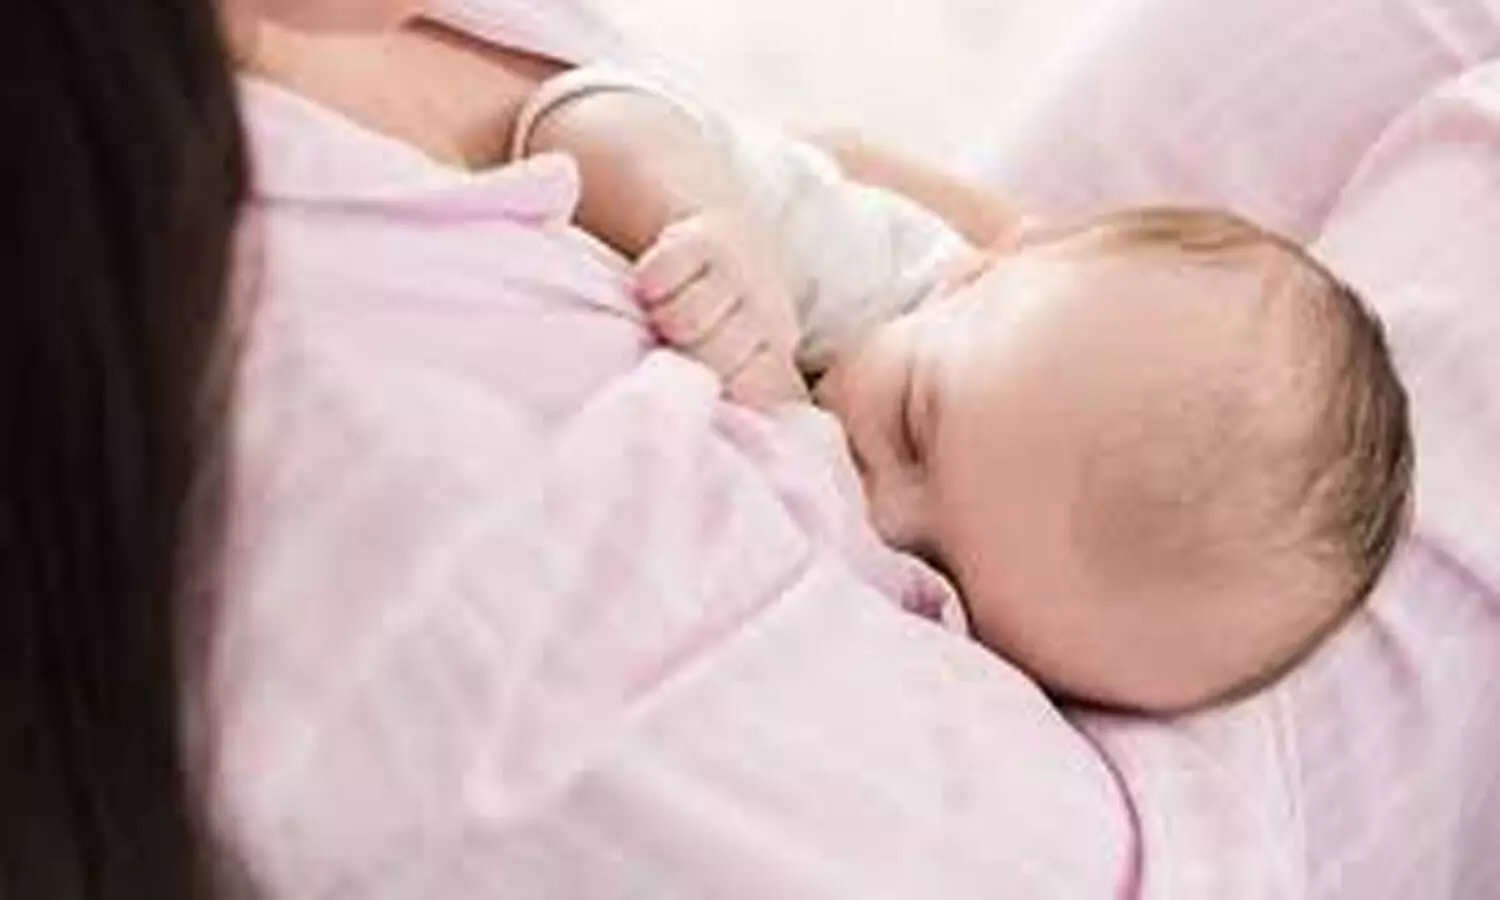 CDC Guidance on Breastfeeding and Breast Milk Feeds during COVID 19 pandemic